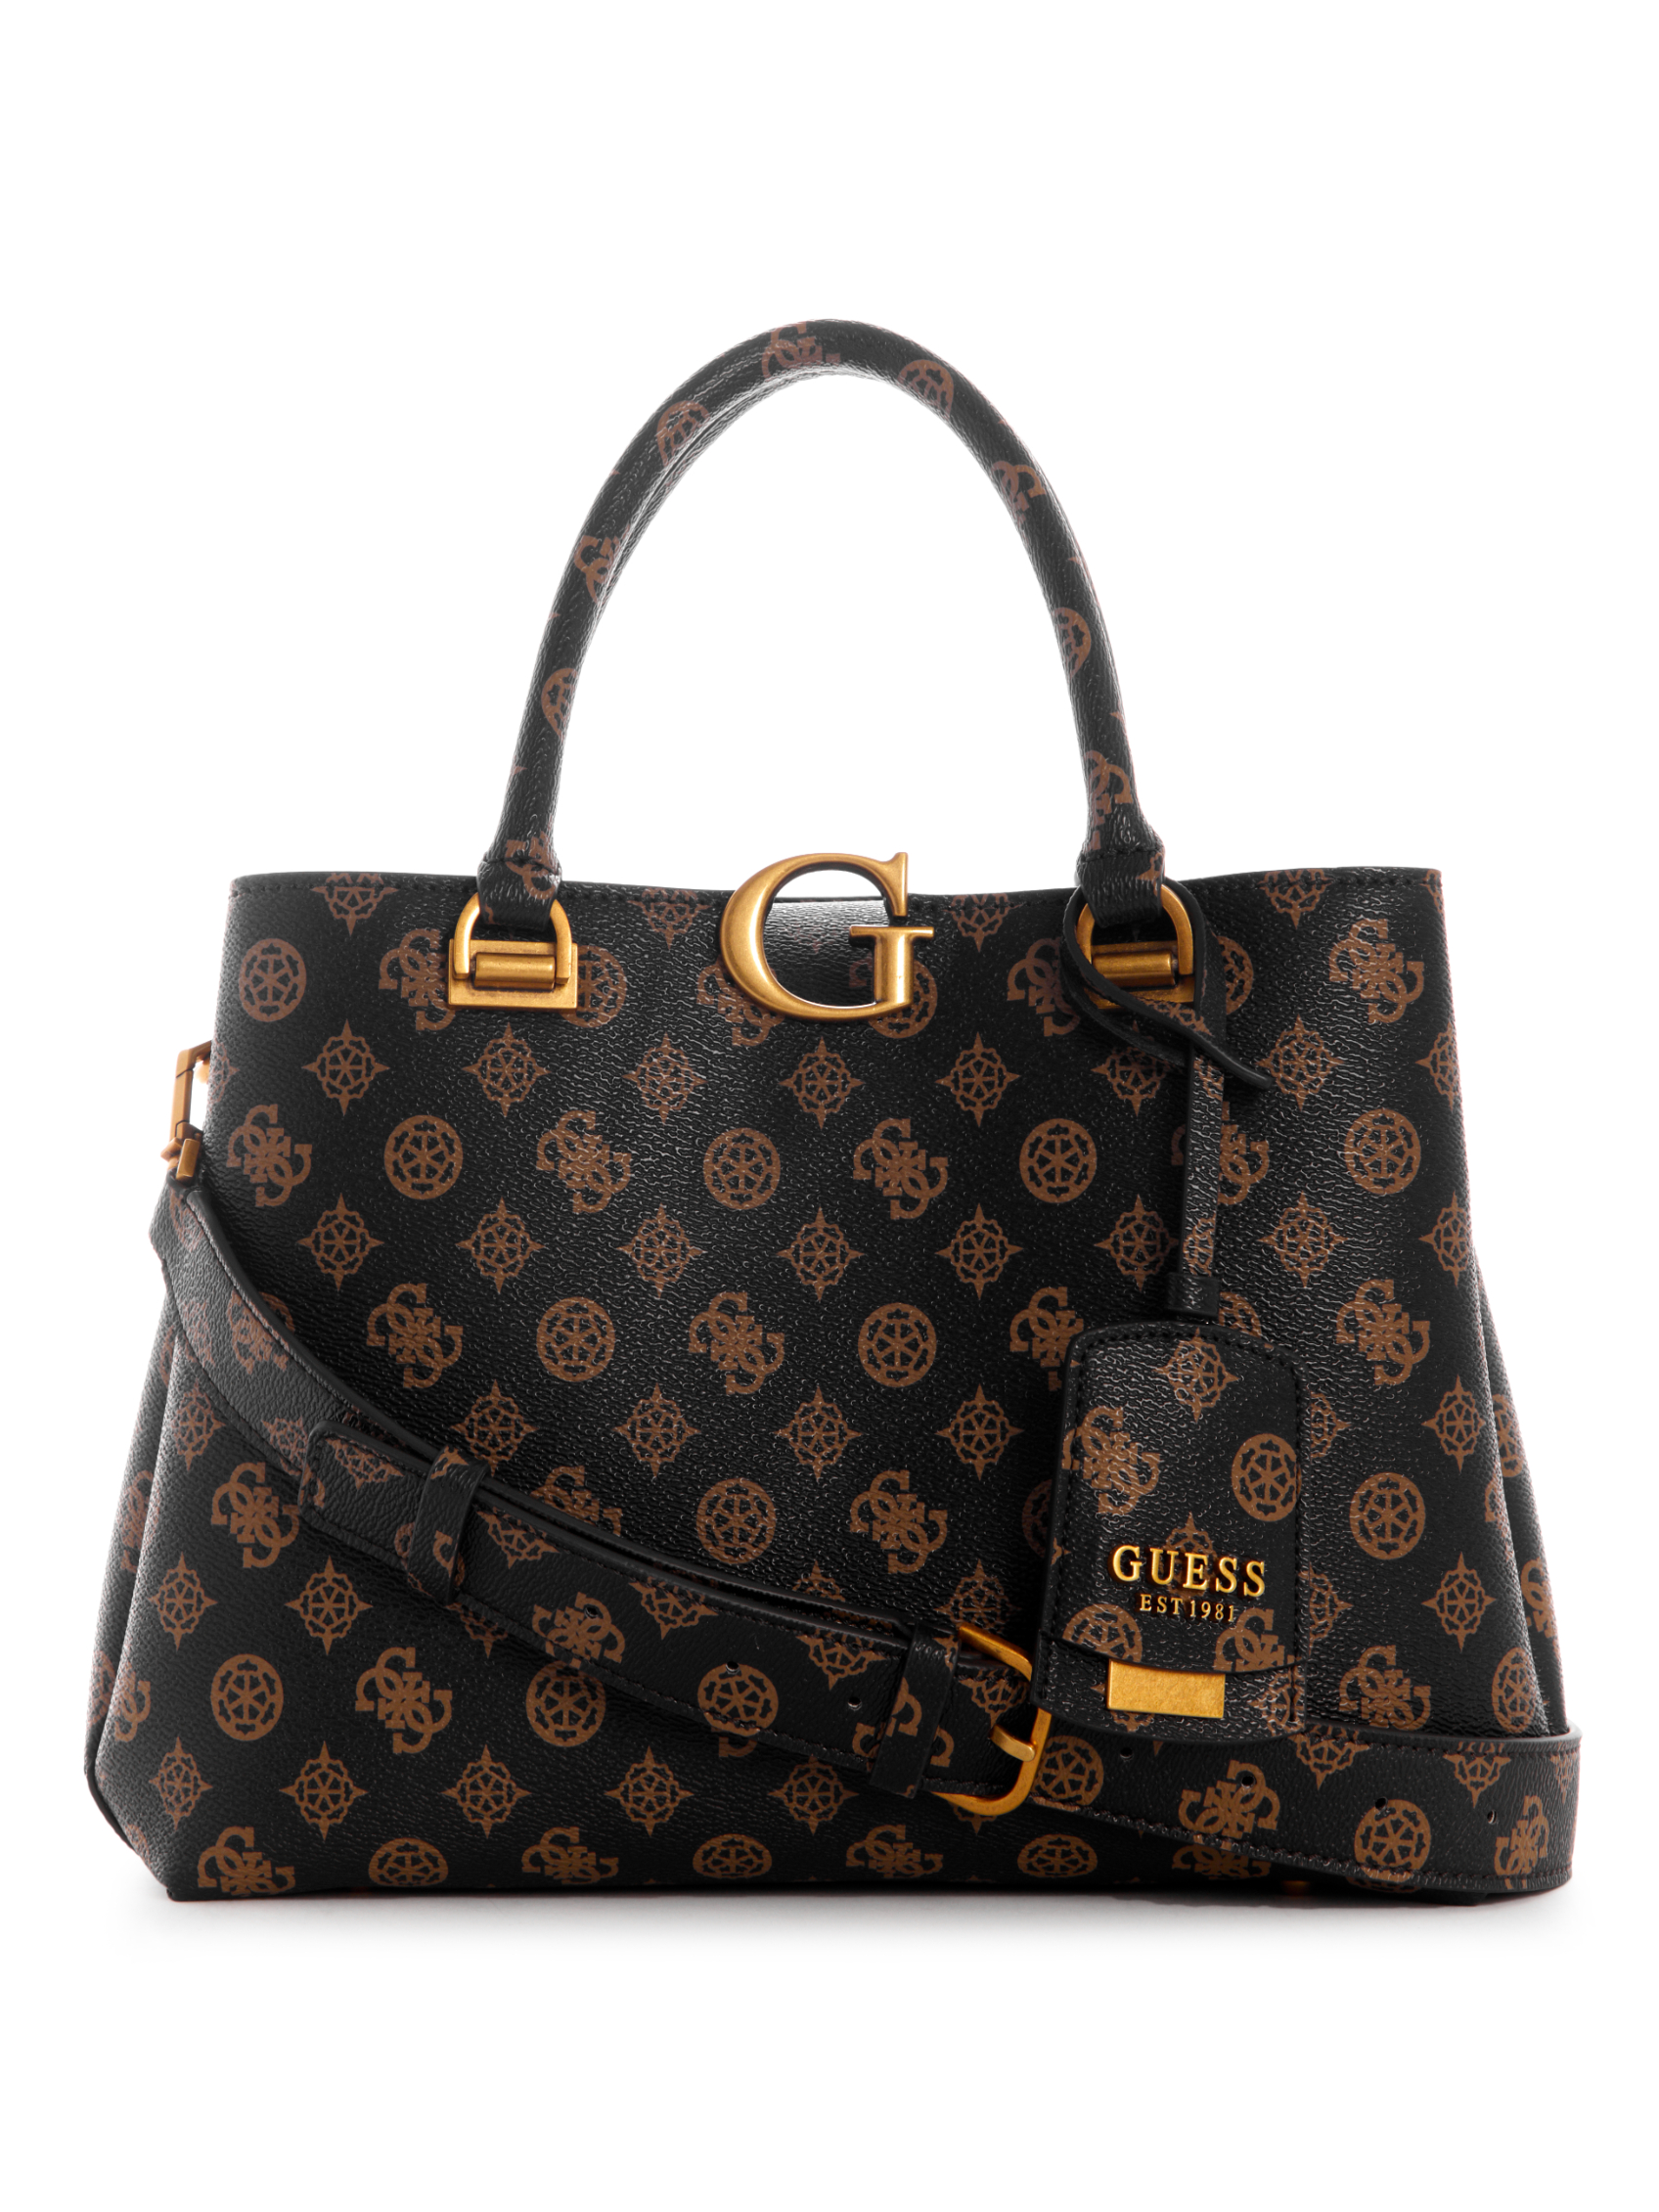 G VIBE GIRLFRIEND SATCHEL | Guess Philippines